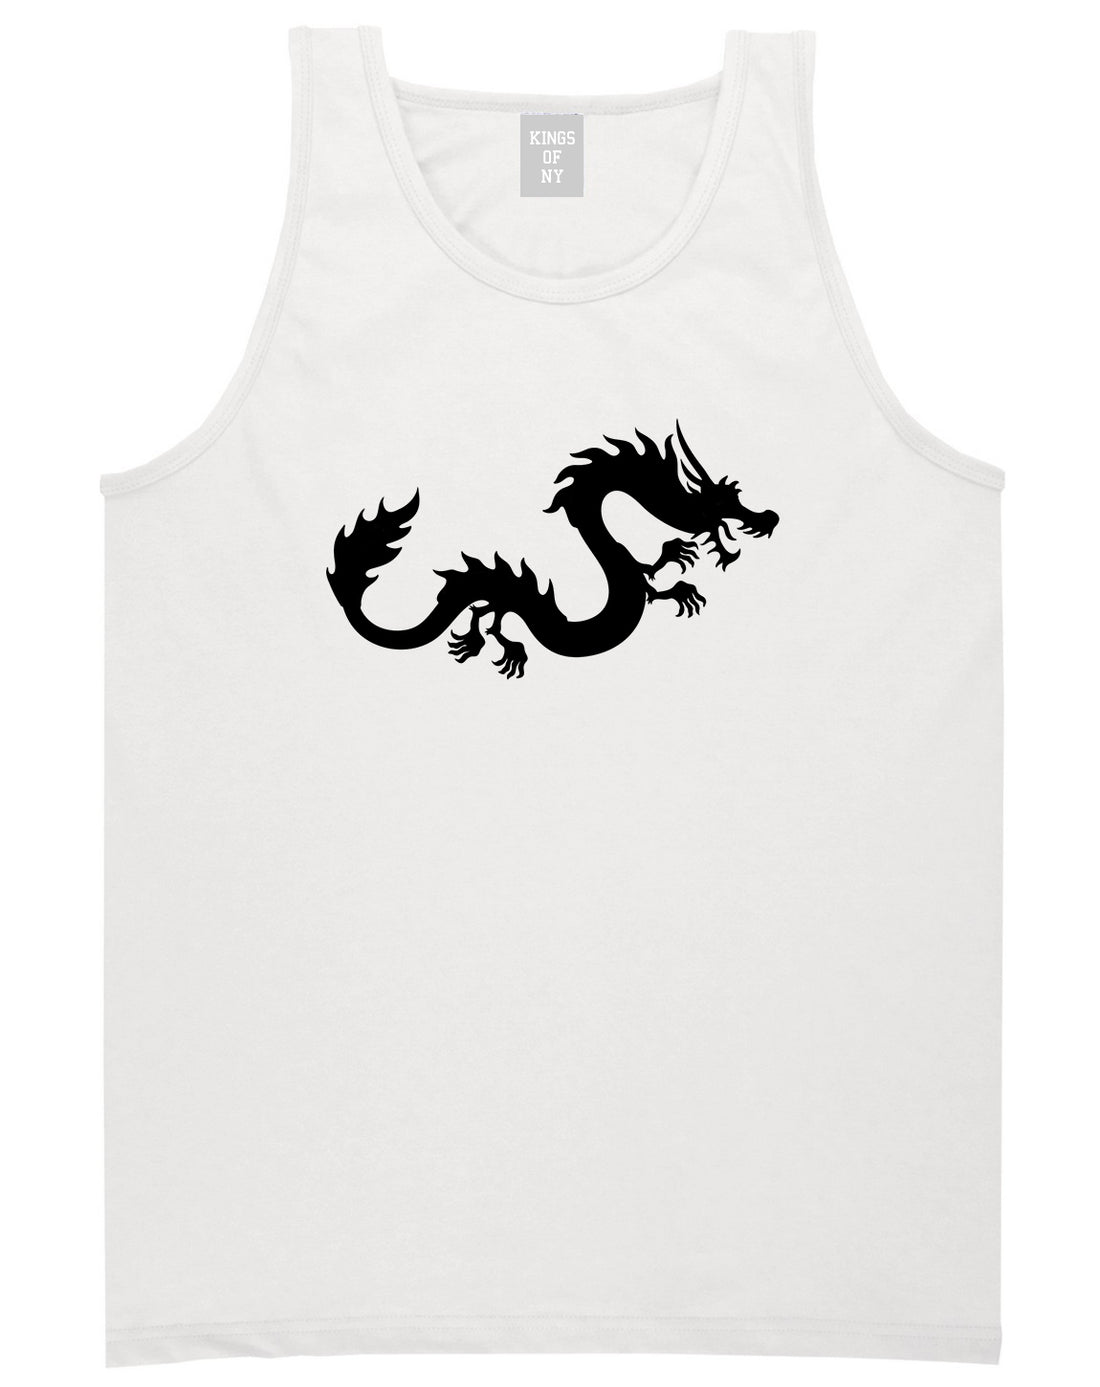 Chinese Dragon White Tank Top Shirt by Kings Of NY